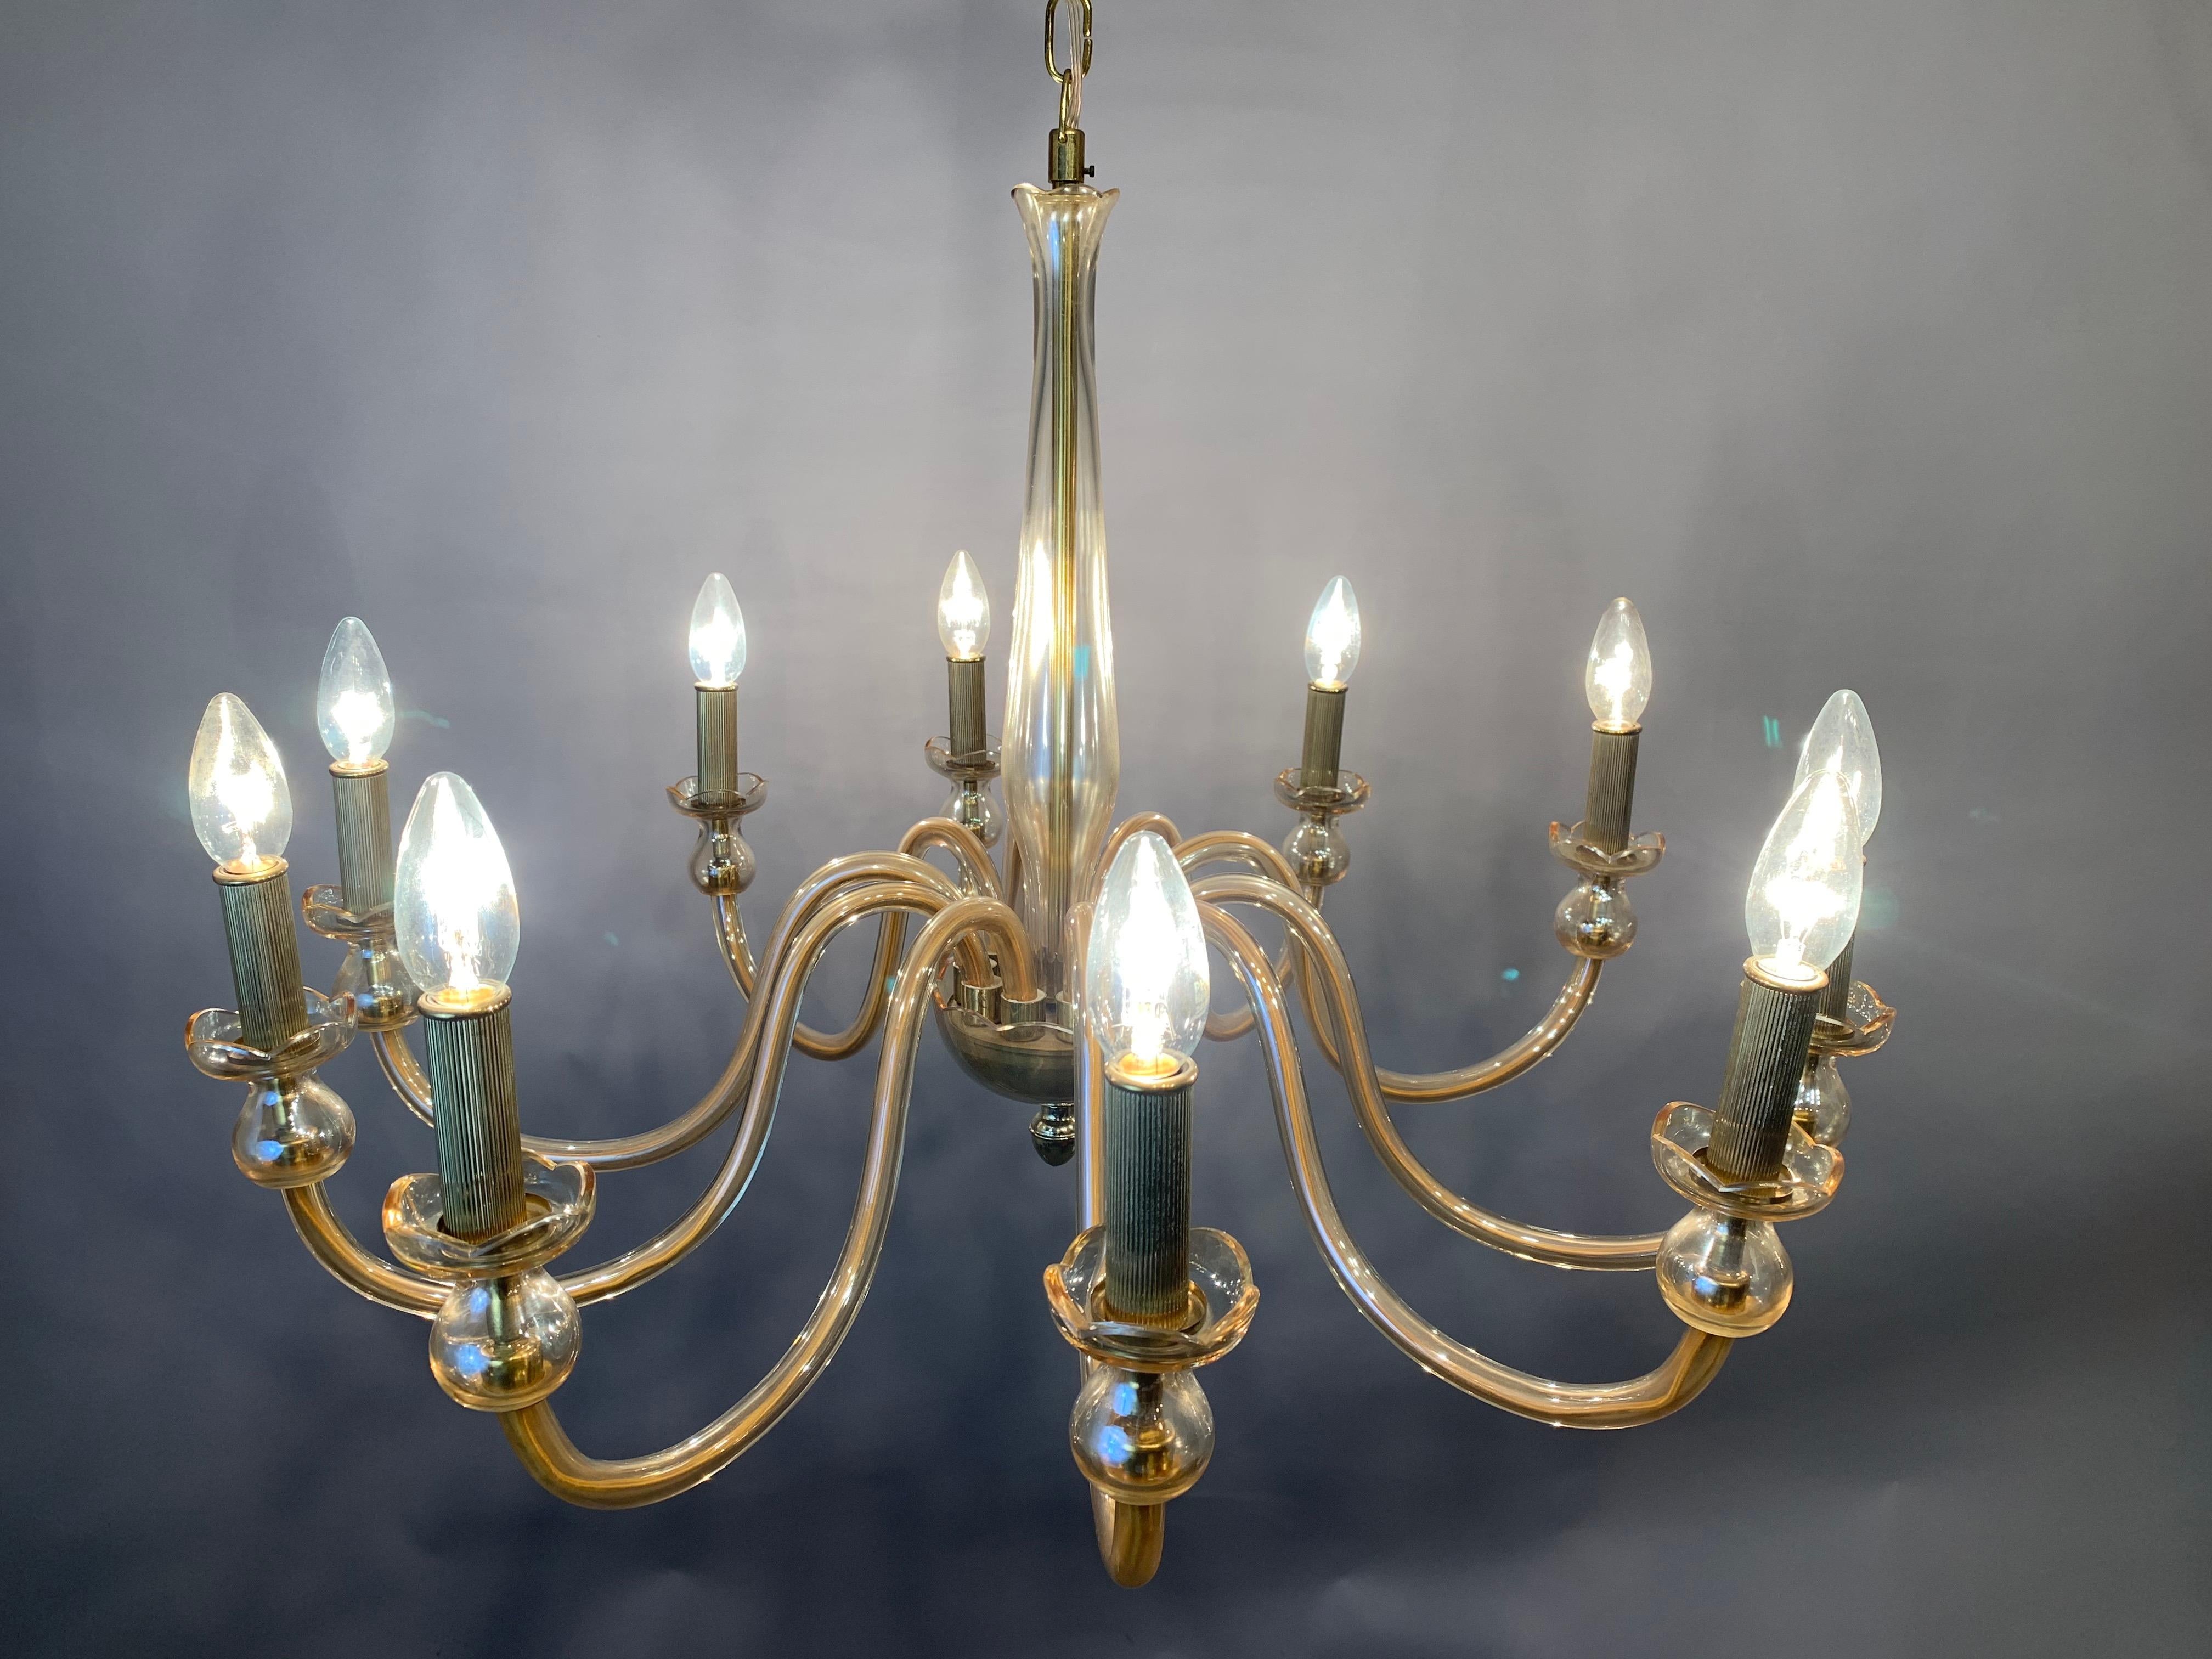 1950s 10 arm amber-colored chandelier made from hand blown Bohemian crystal glass with brass fittings. Handcrafted in the Czech Republic. The brass candle bulb holders feature indented lines running vertically. A very glamorous chandelier which is